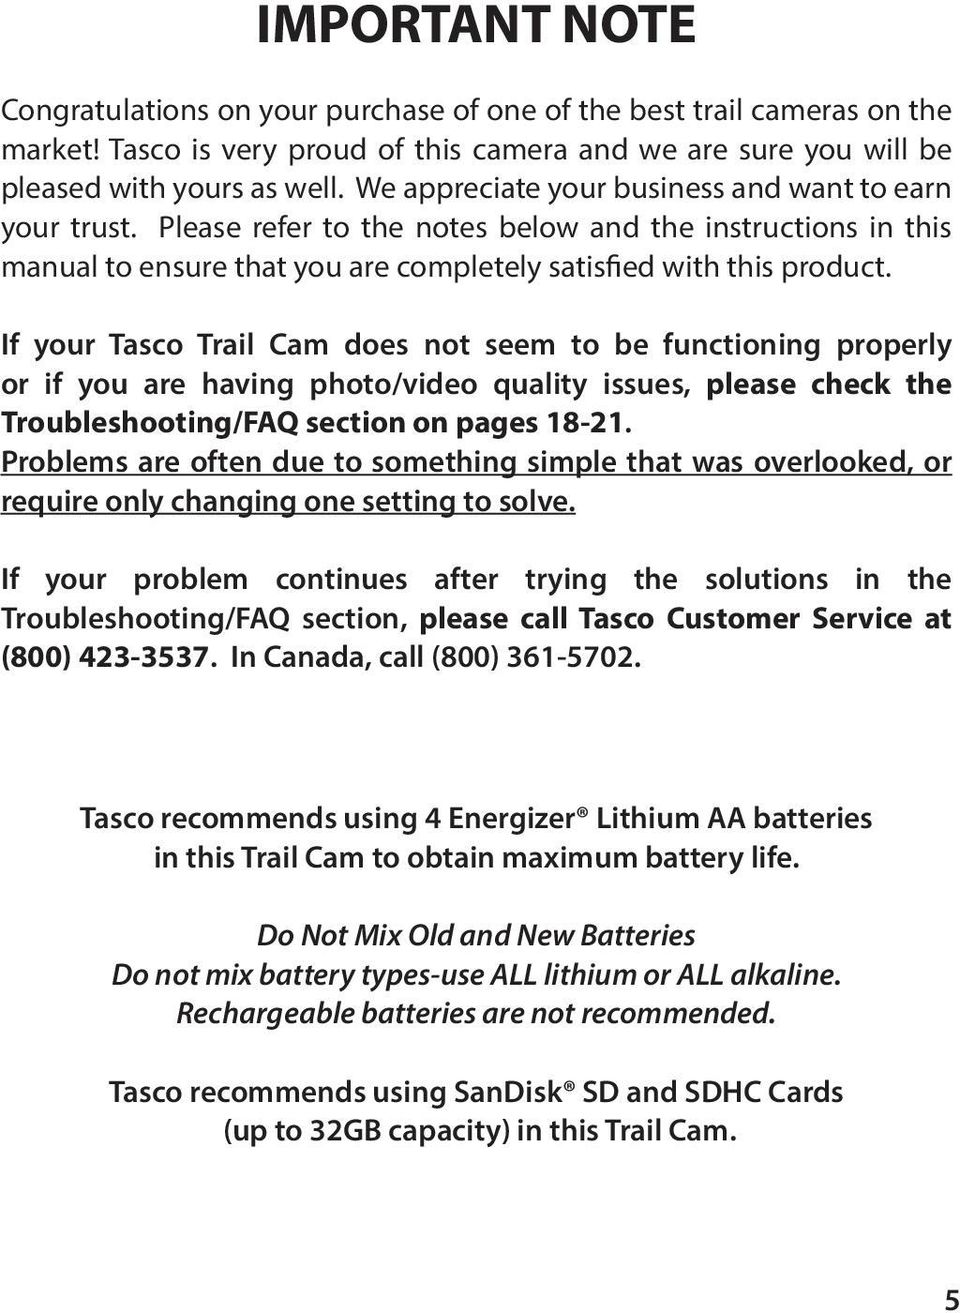 If your Tasco Trail Cam does not seem to be functioning properly or if you are having photo/video quality issues, please check the Troubleshooting/FAQ section on pages 18-21.